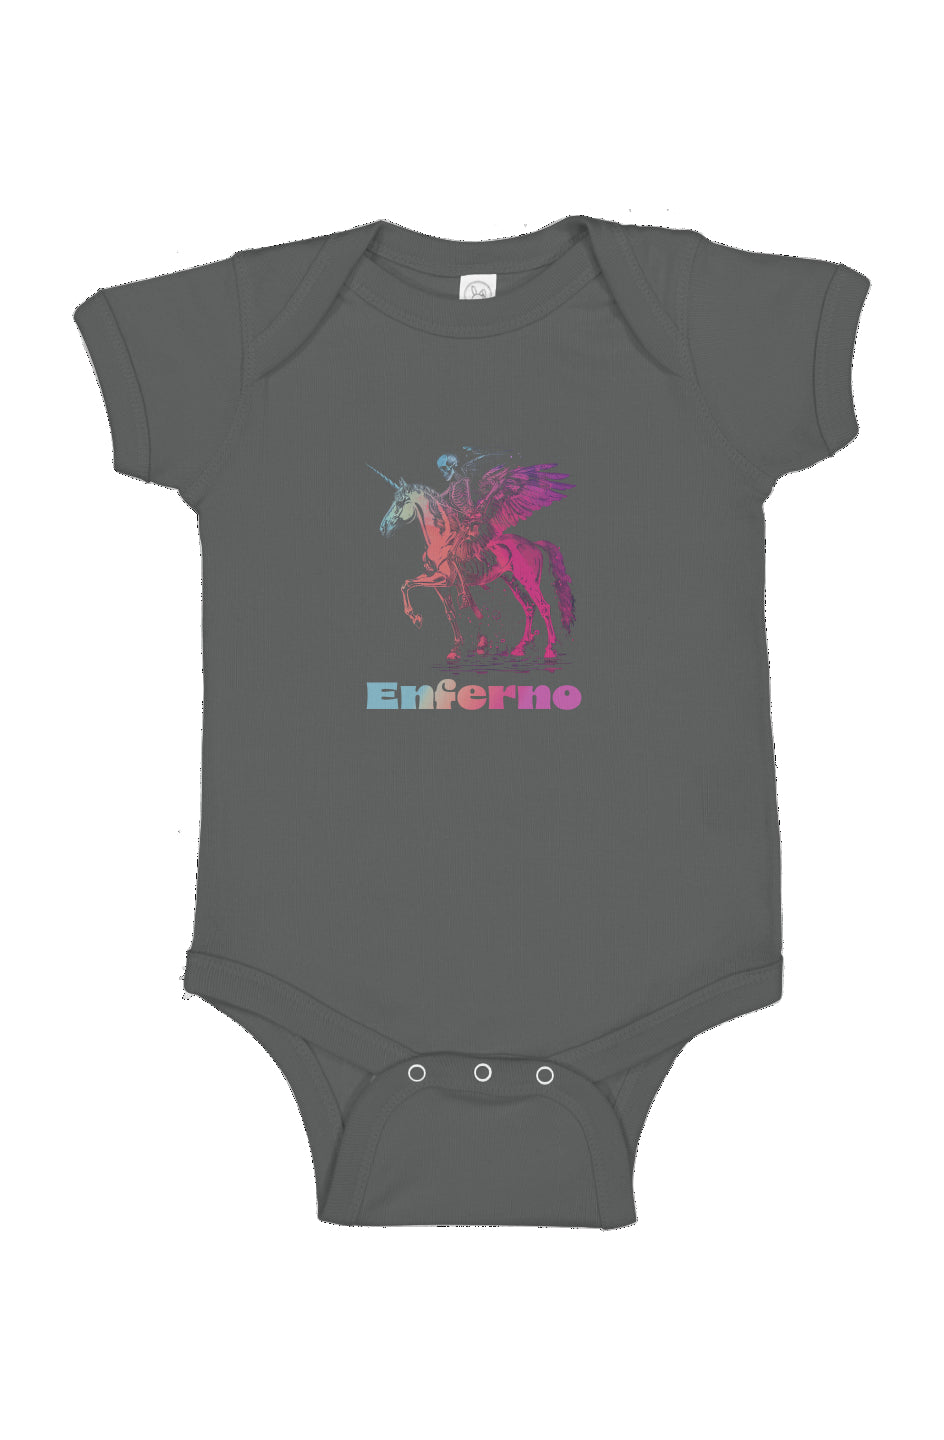 Enferno Death on a Rainbow Onesie in Charcoal.